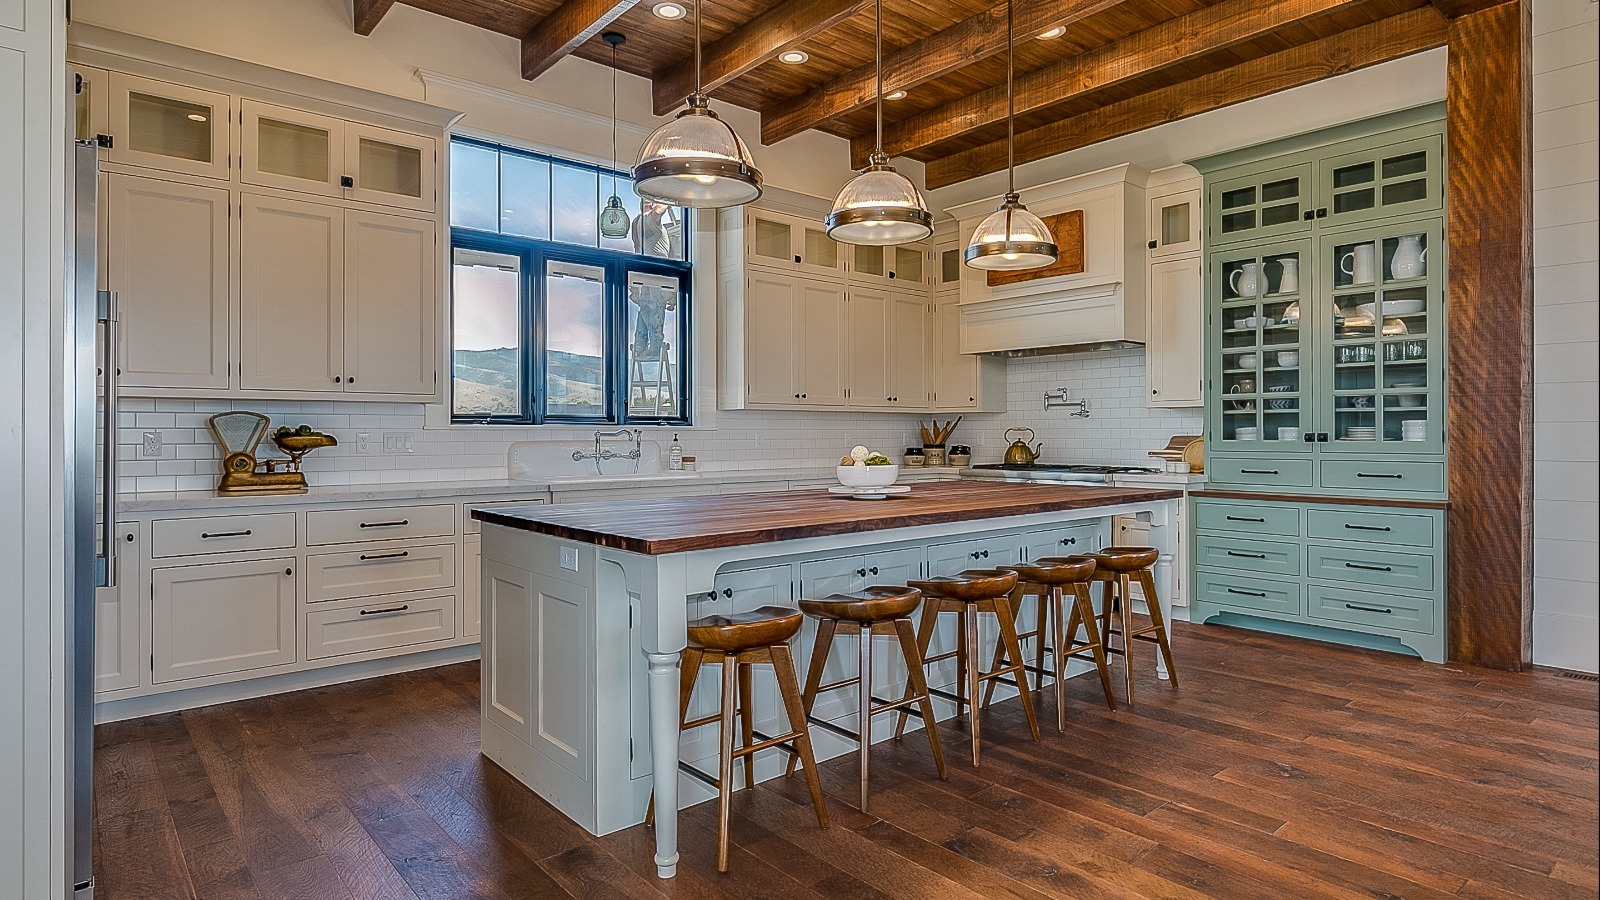 https://www.housedigest.com/img/gallery/5-tips-for-creating-the-perfect-country-style-kitchen/l-intro-1663150725.jpg